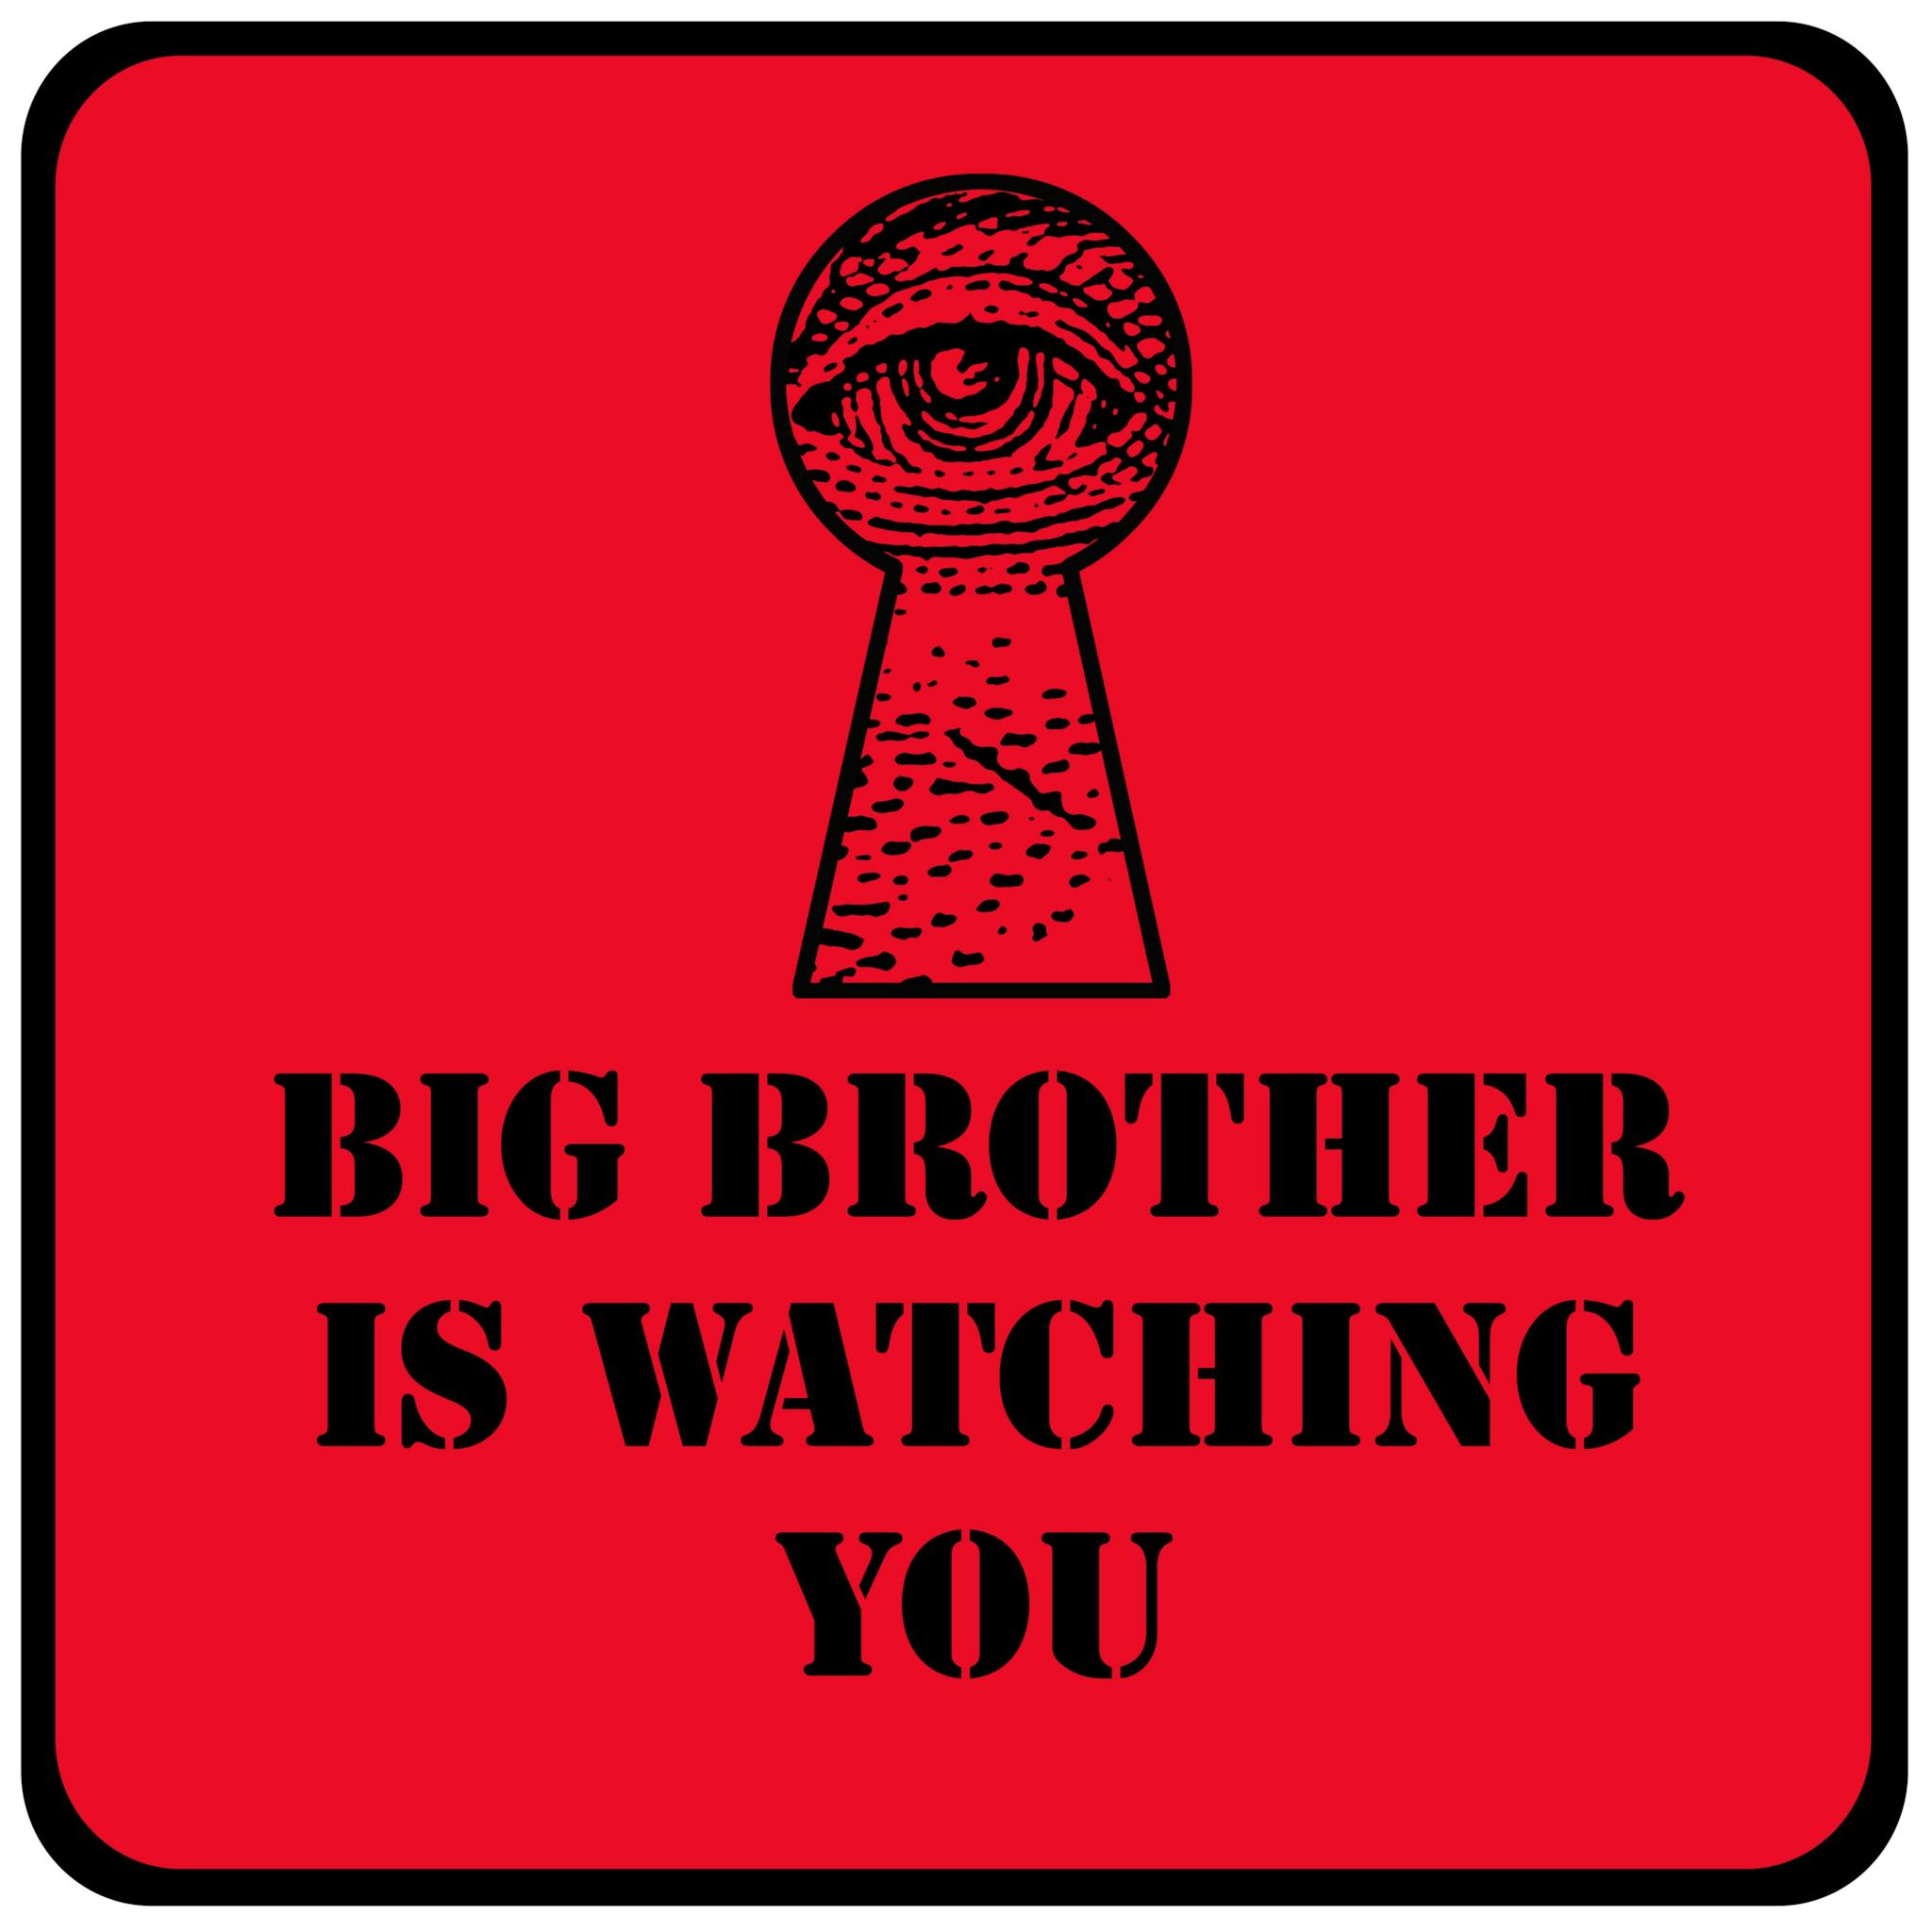 featured image - Big Brother Meets Black Mirror in the Middle Kingdom